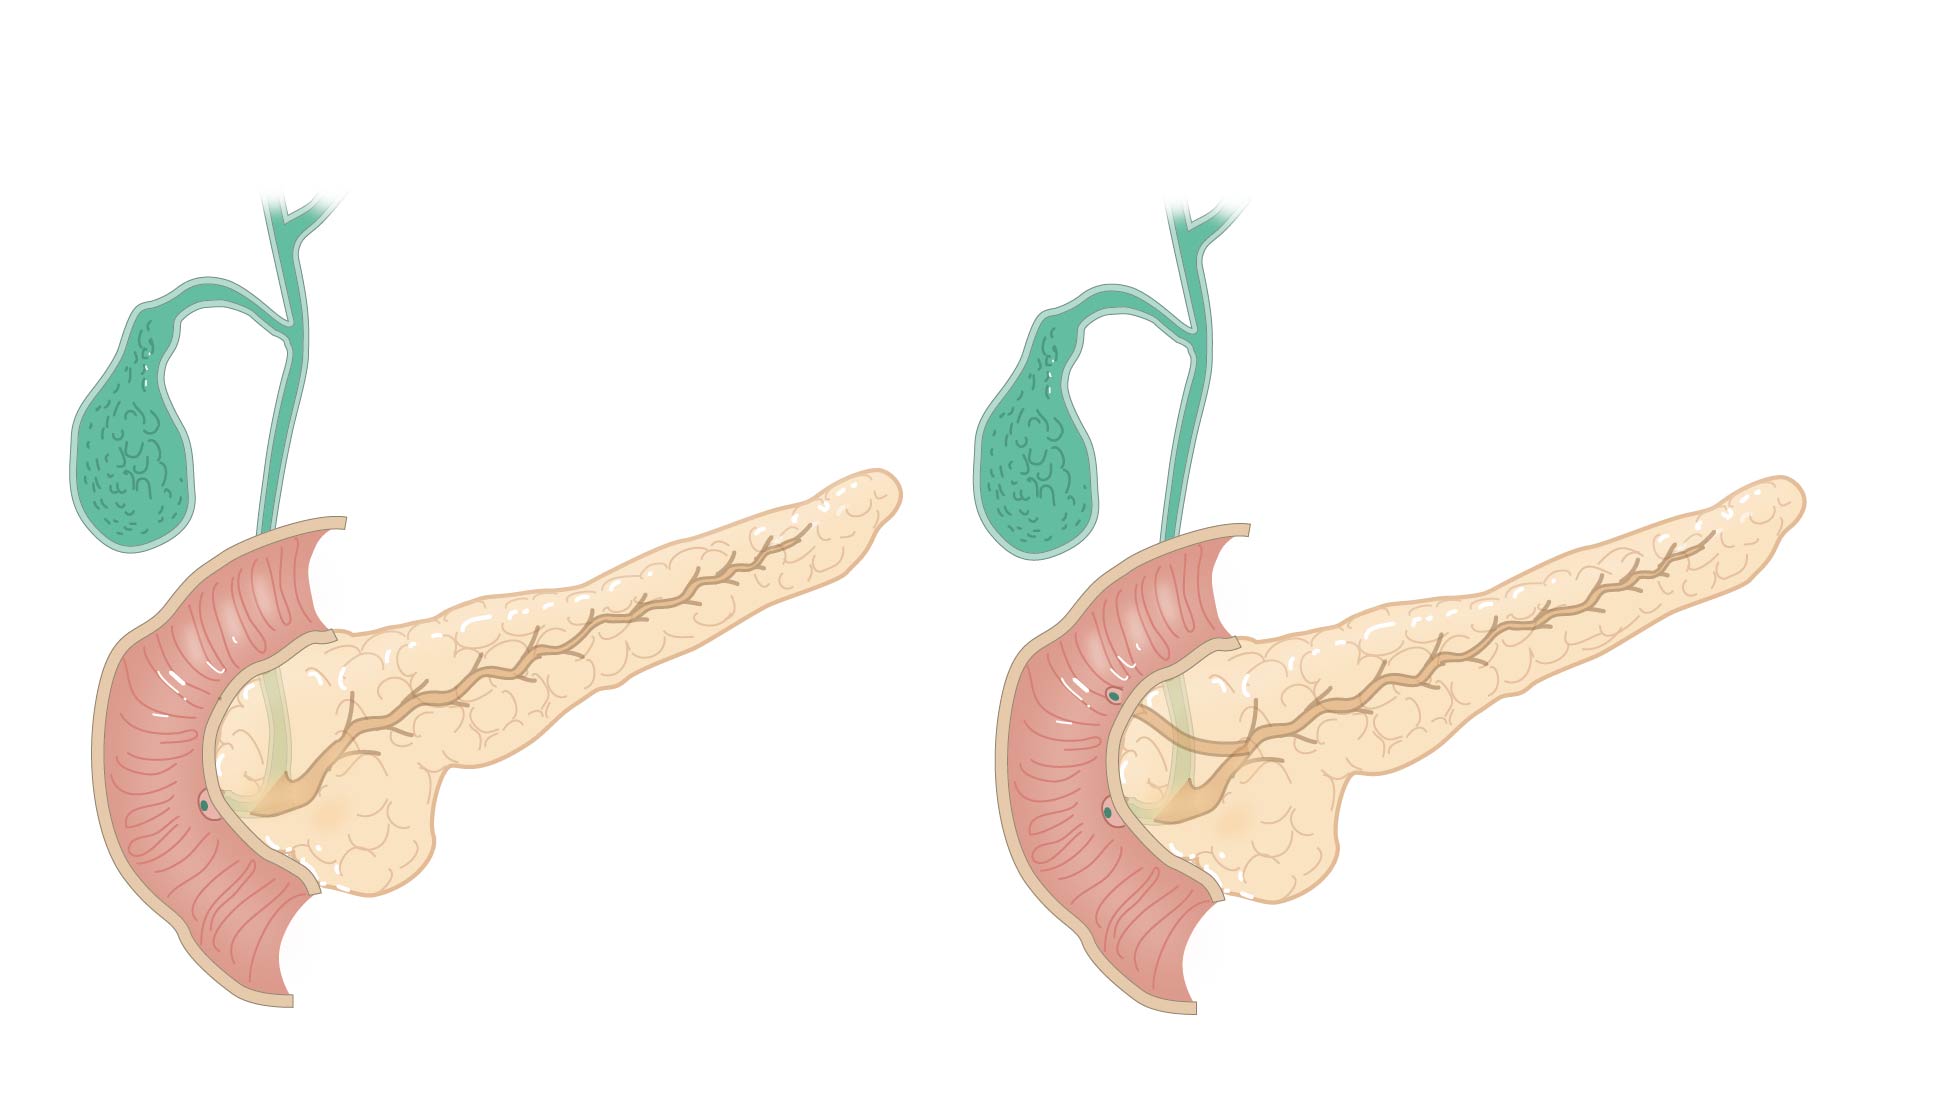 Slagter - Drawing Biliary system and pancreatic duct - no labels